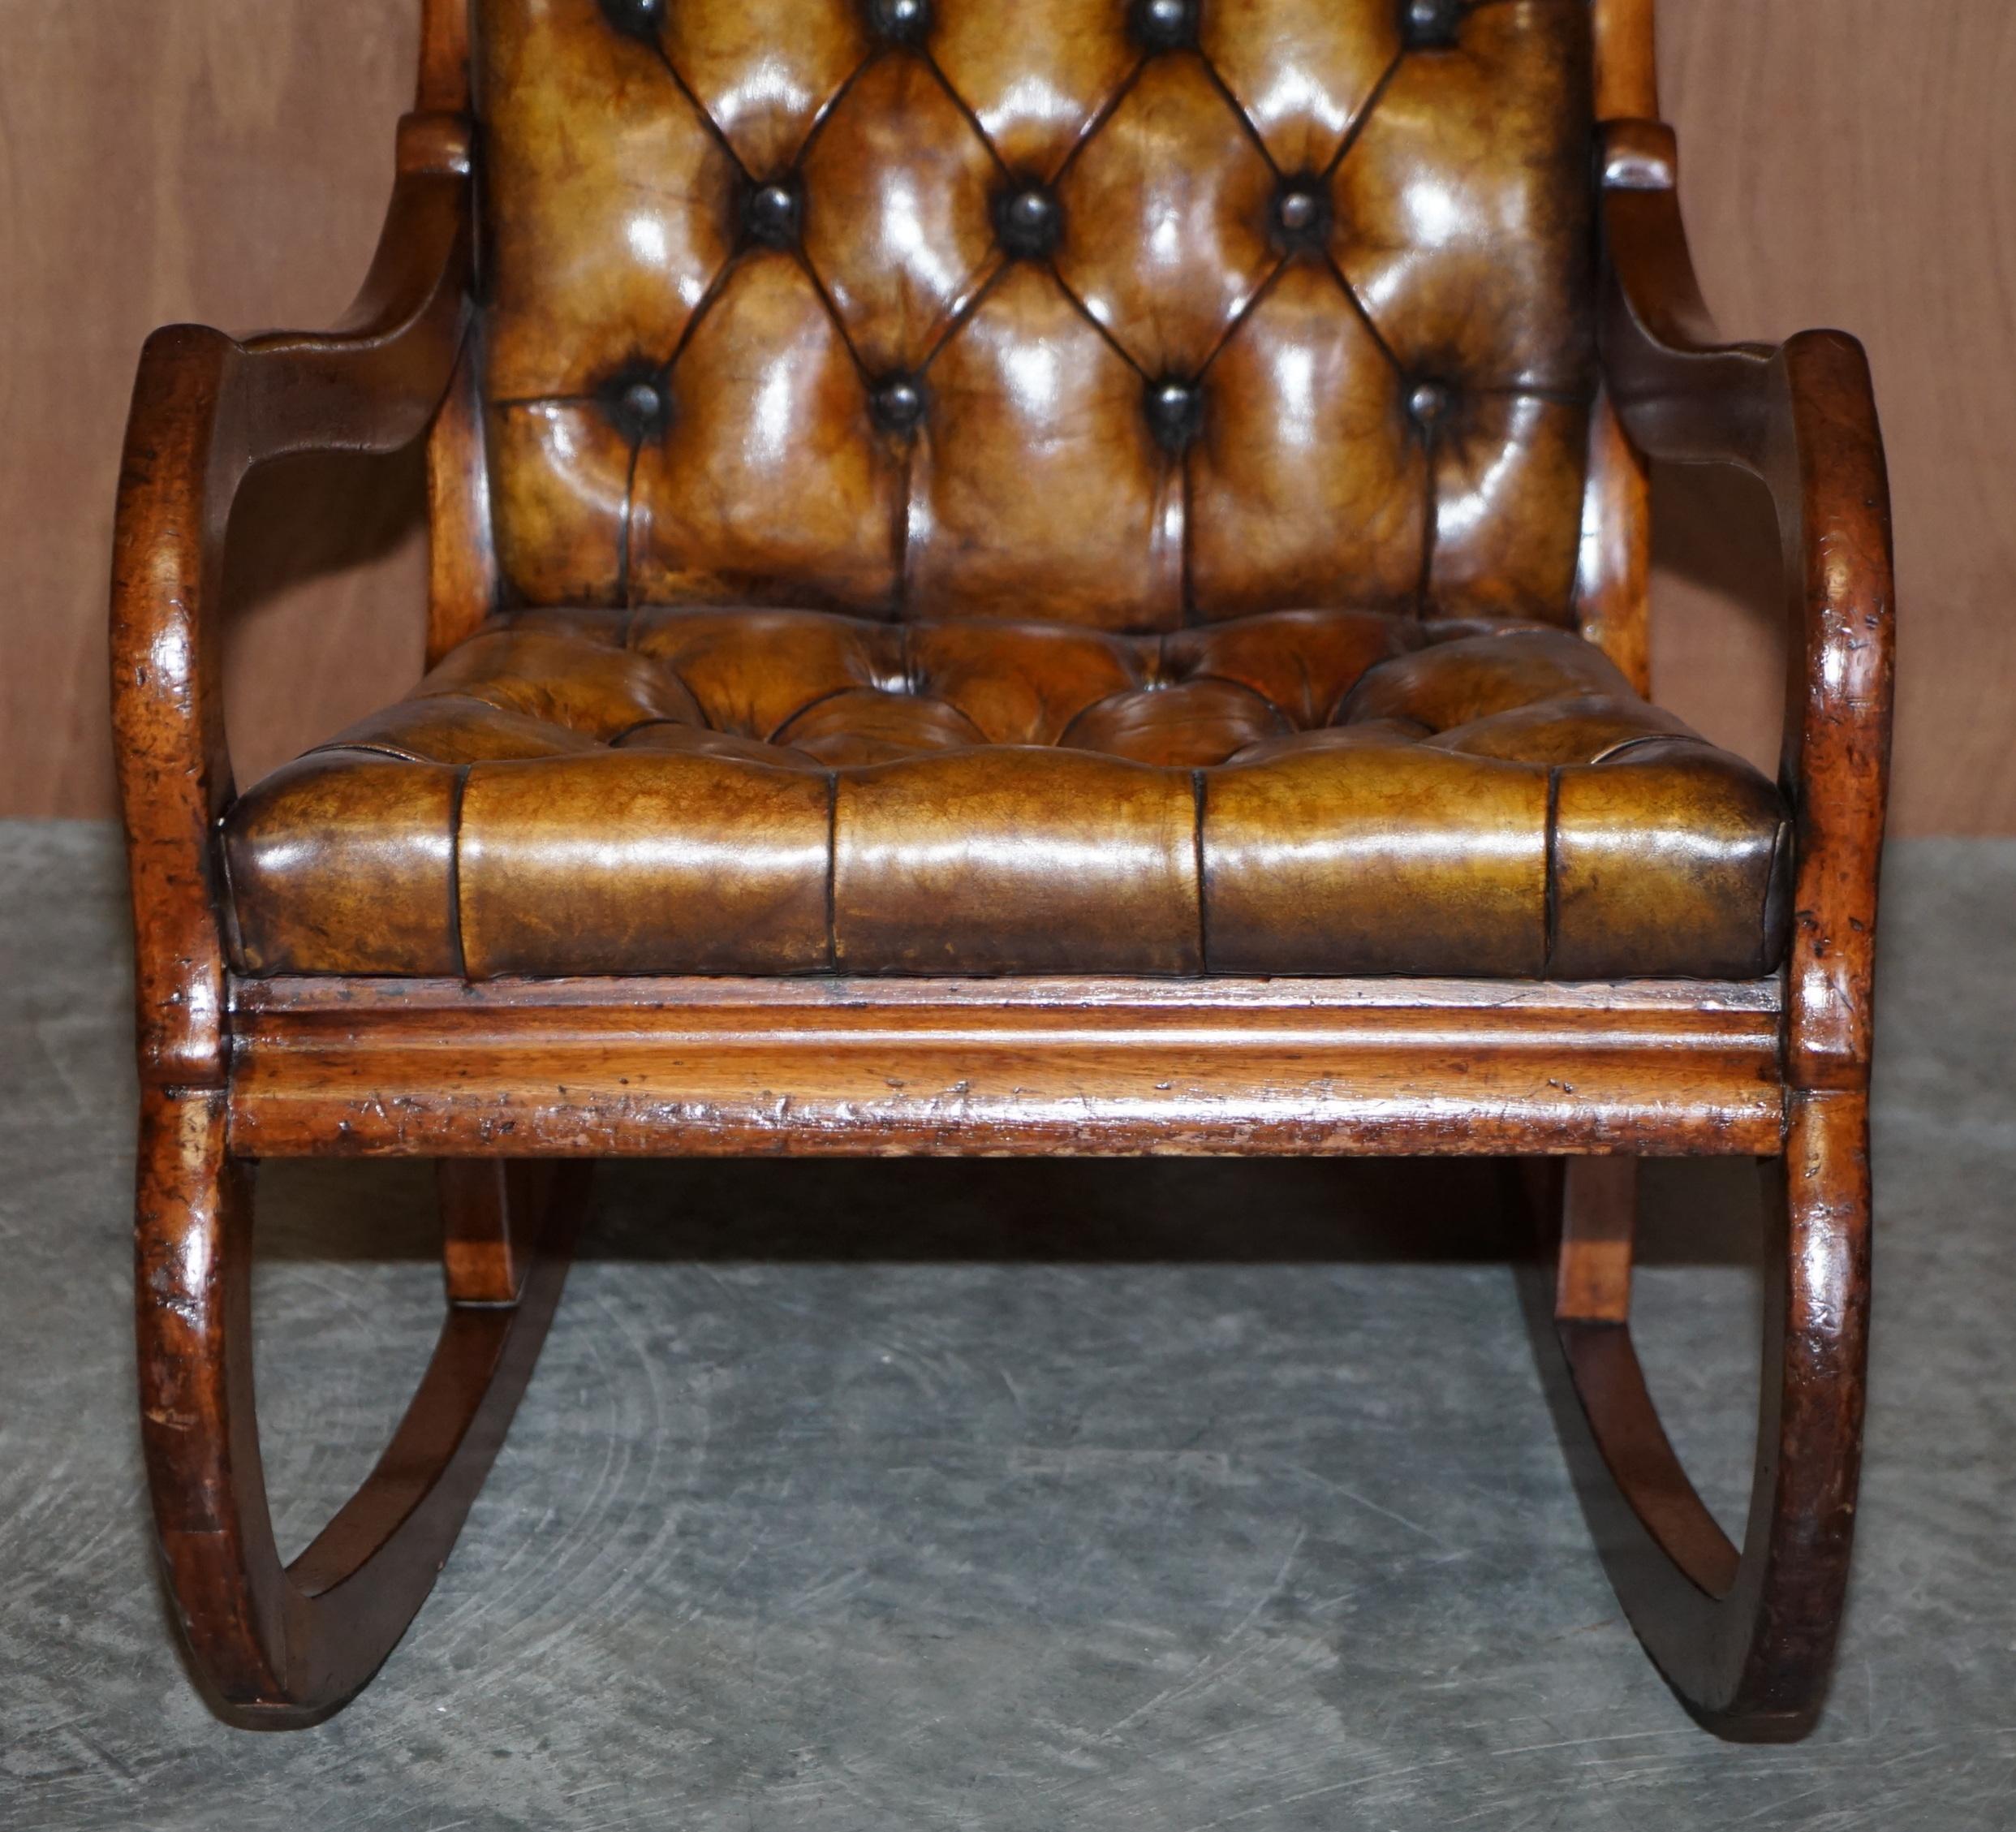 Early 20th Century FINE ANTIQUE CIRCA 1900 HAND CARVED CHESTERFIELD BROWN LEATHER ROCKiNG ARMCHAIR